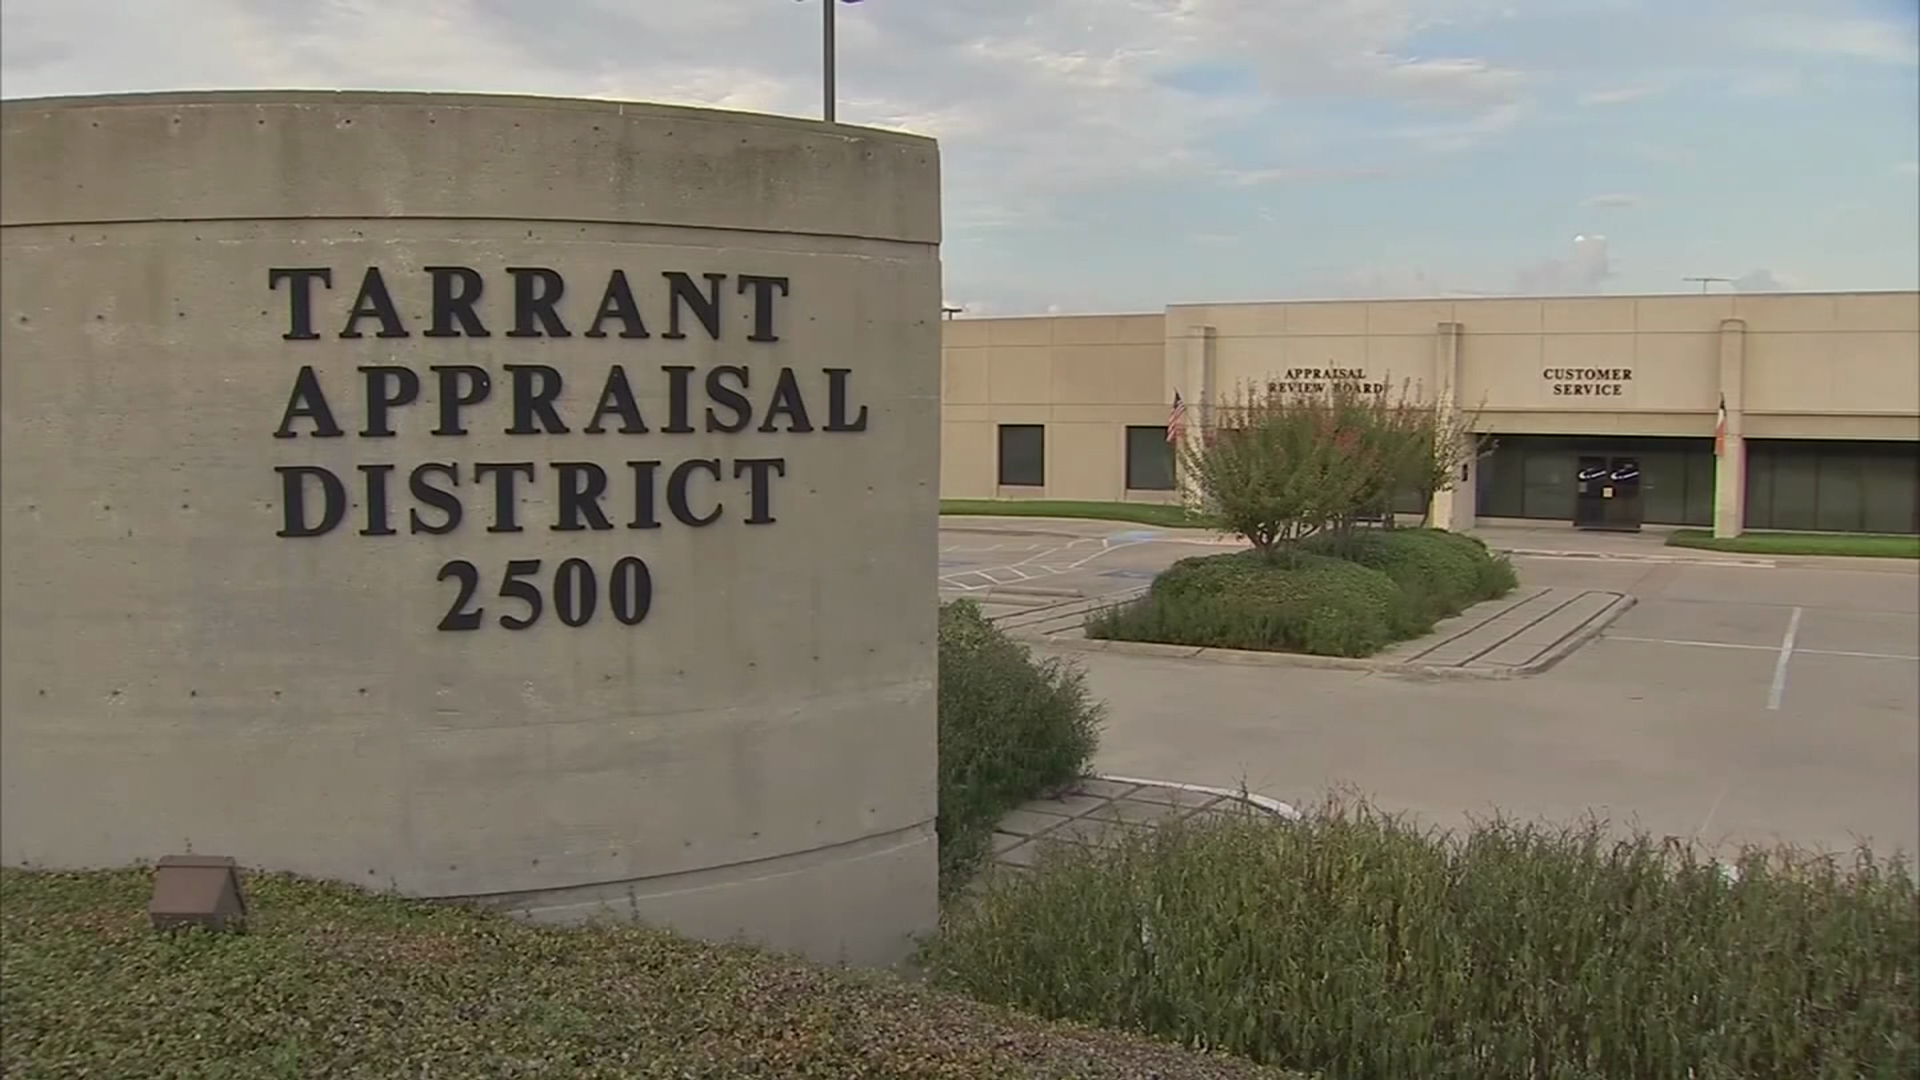 Hackers demand $700,000 ransom from Tarrant Appraisal District,
attorney says